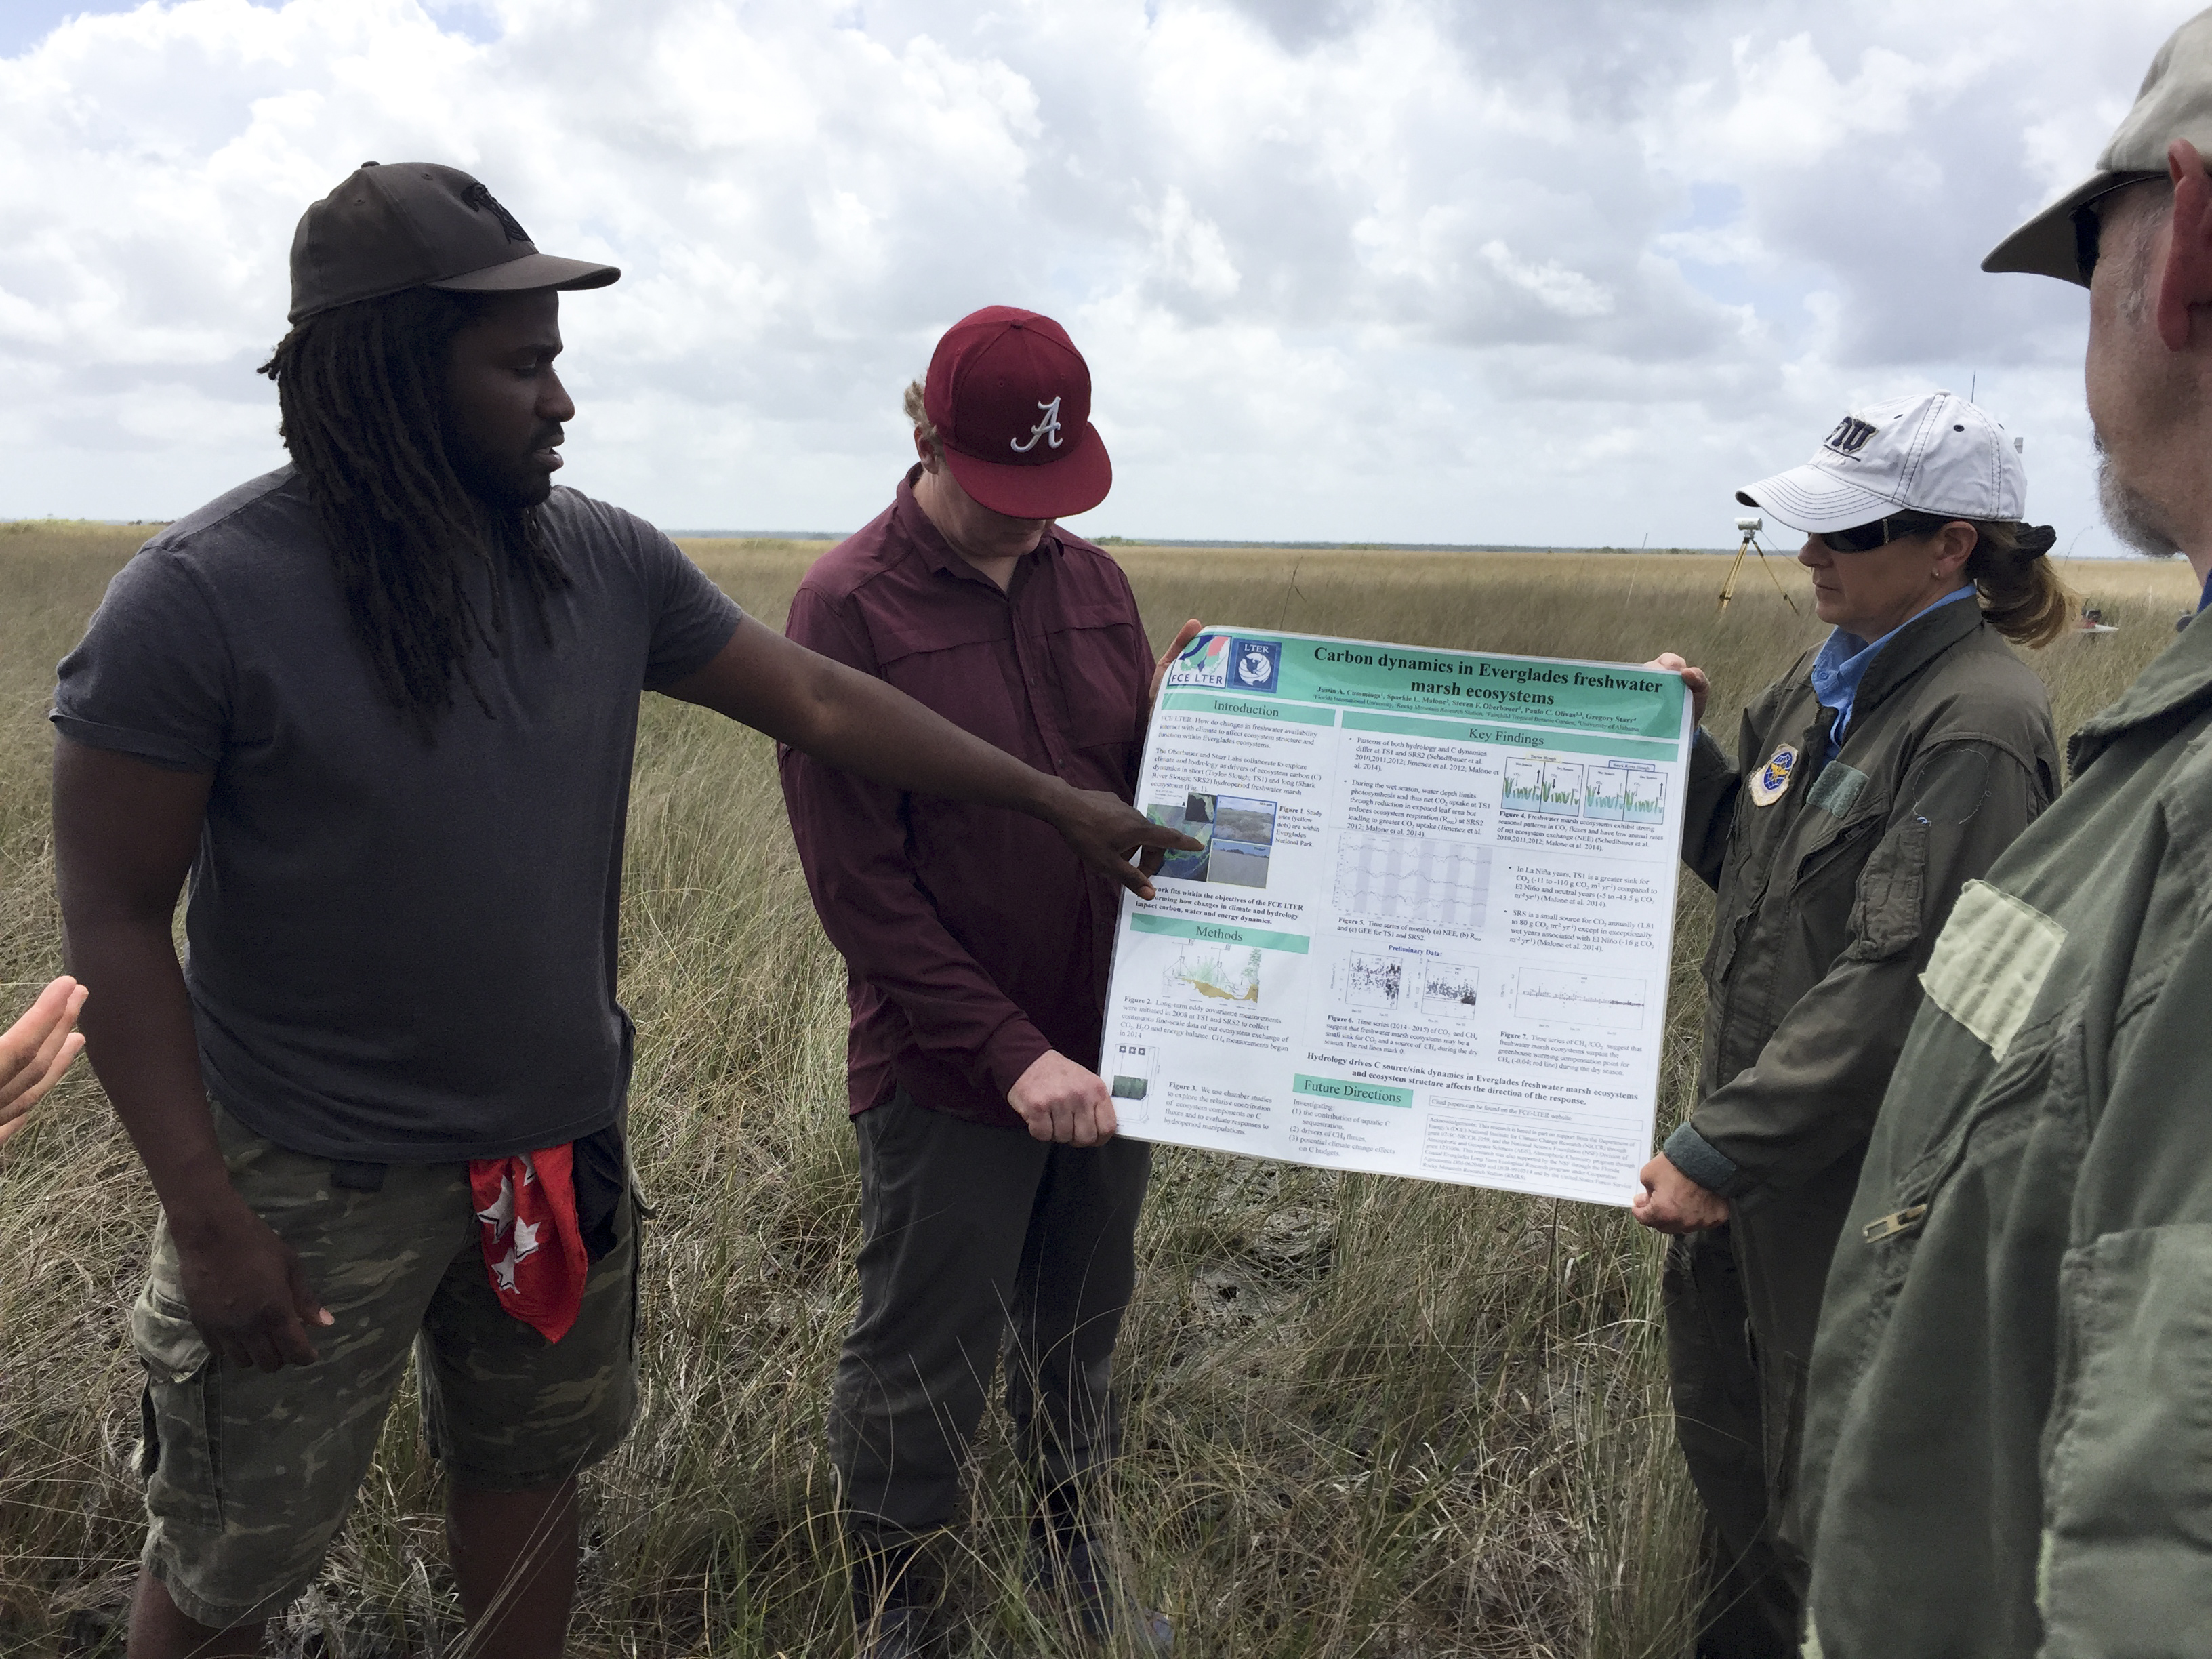 Dr. Justin Cummings presenting his field poster near TS/Ph-1b in Taylor Slough during the FCE LTER Mid-term Review field trip